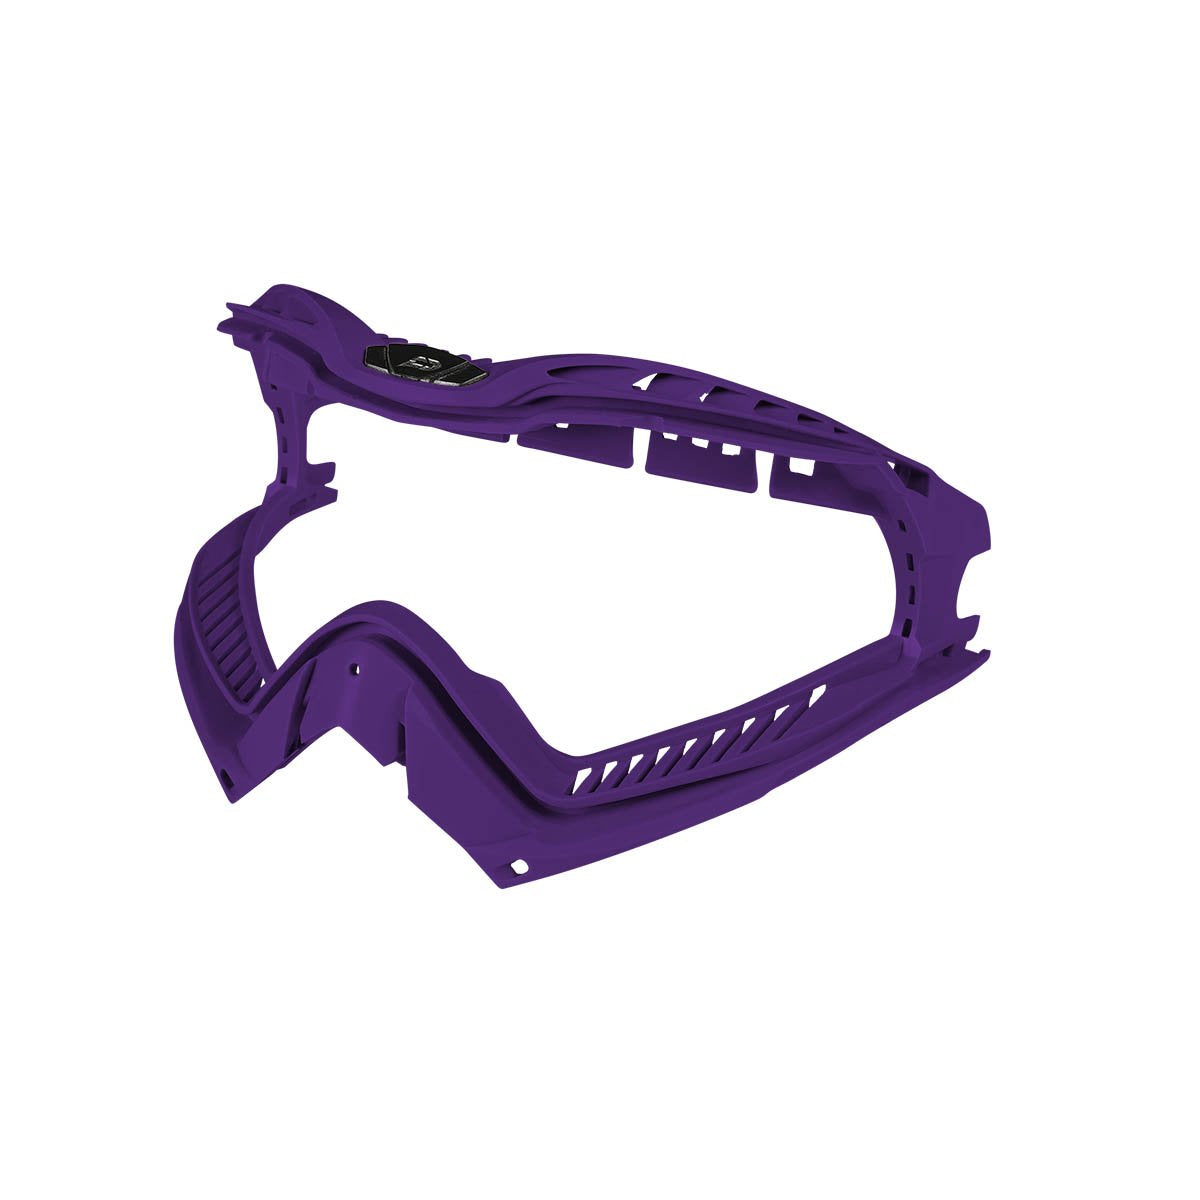 Push Unite Goggle Upper Frame - Eminent Paintball And Airsoft